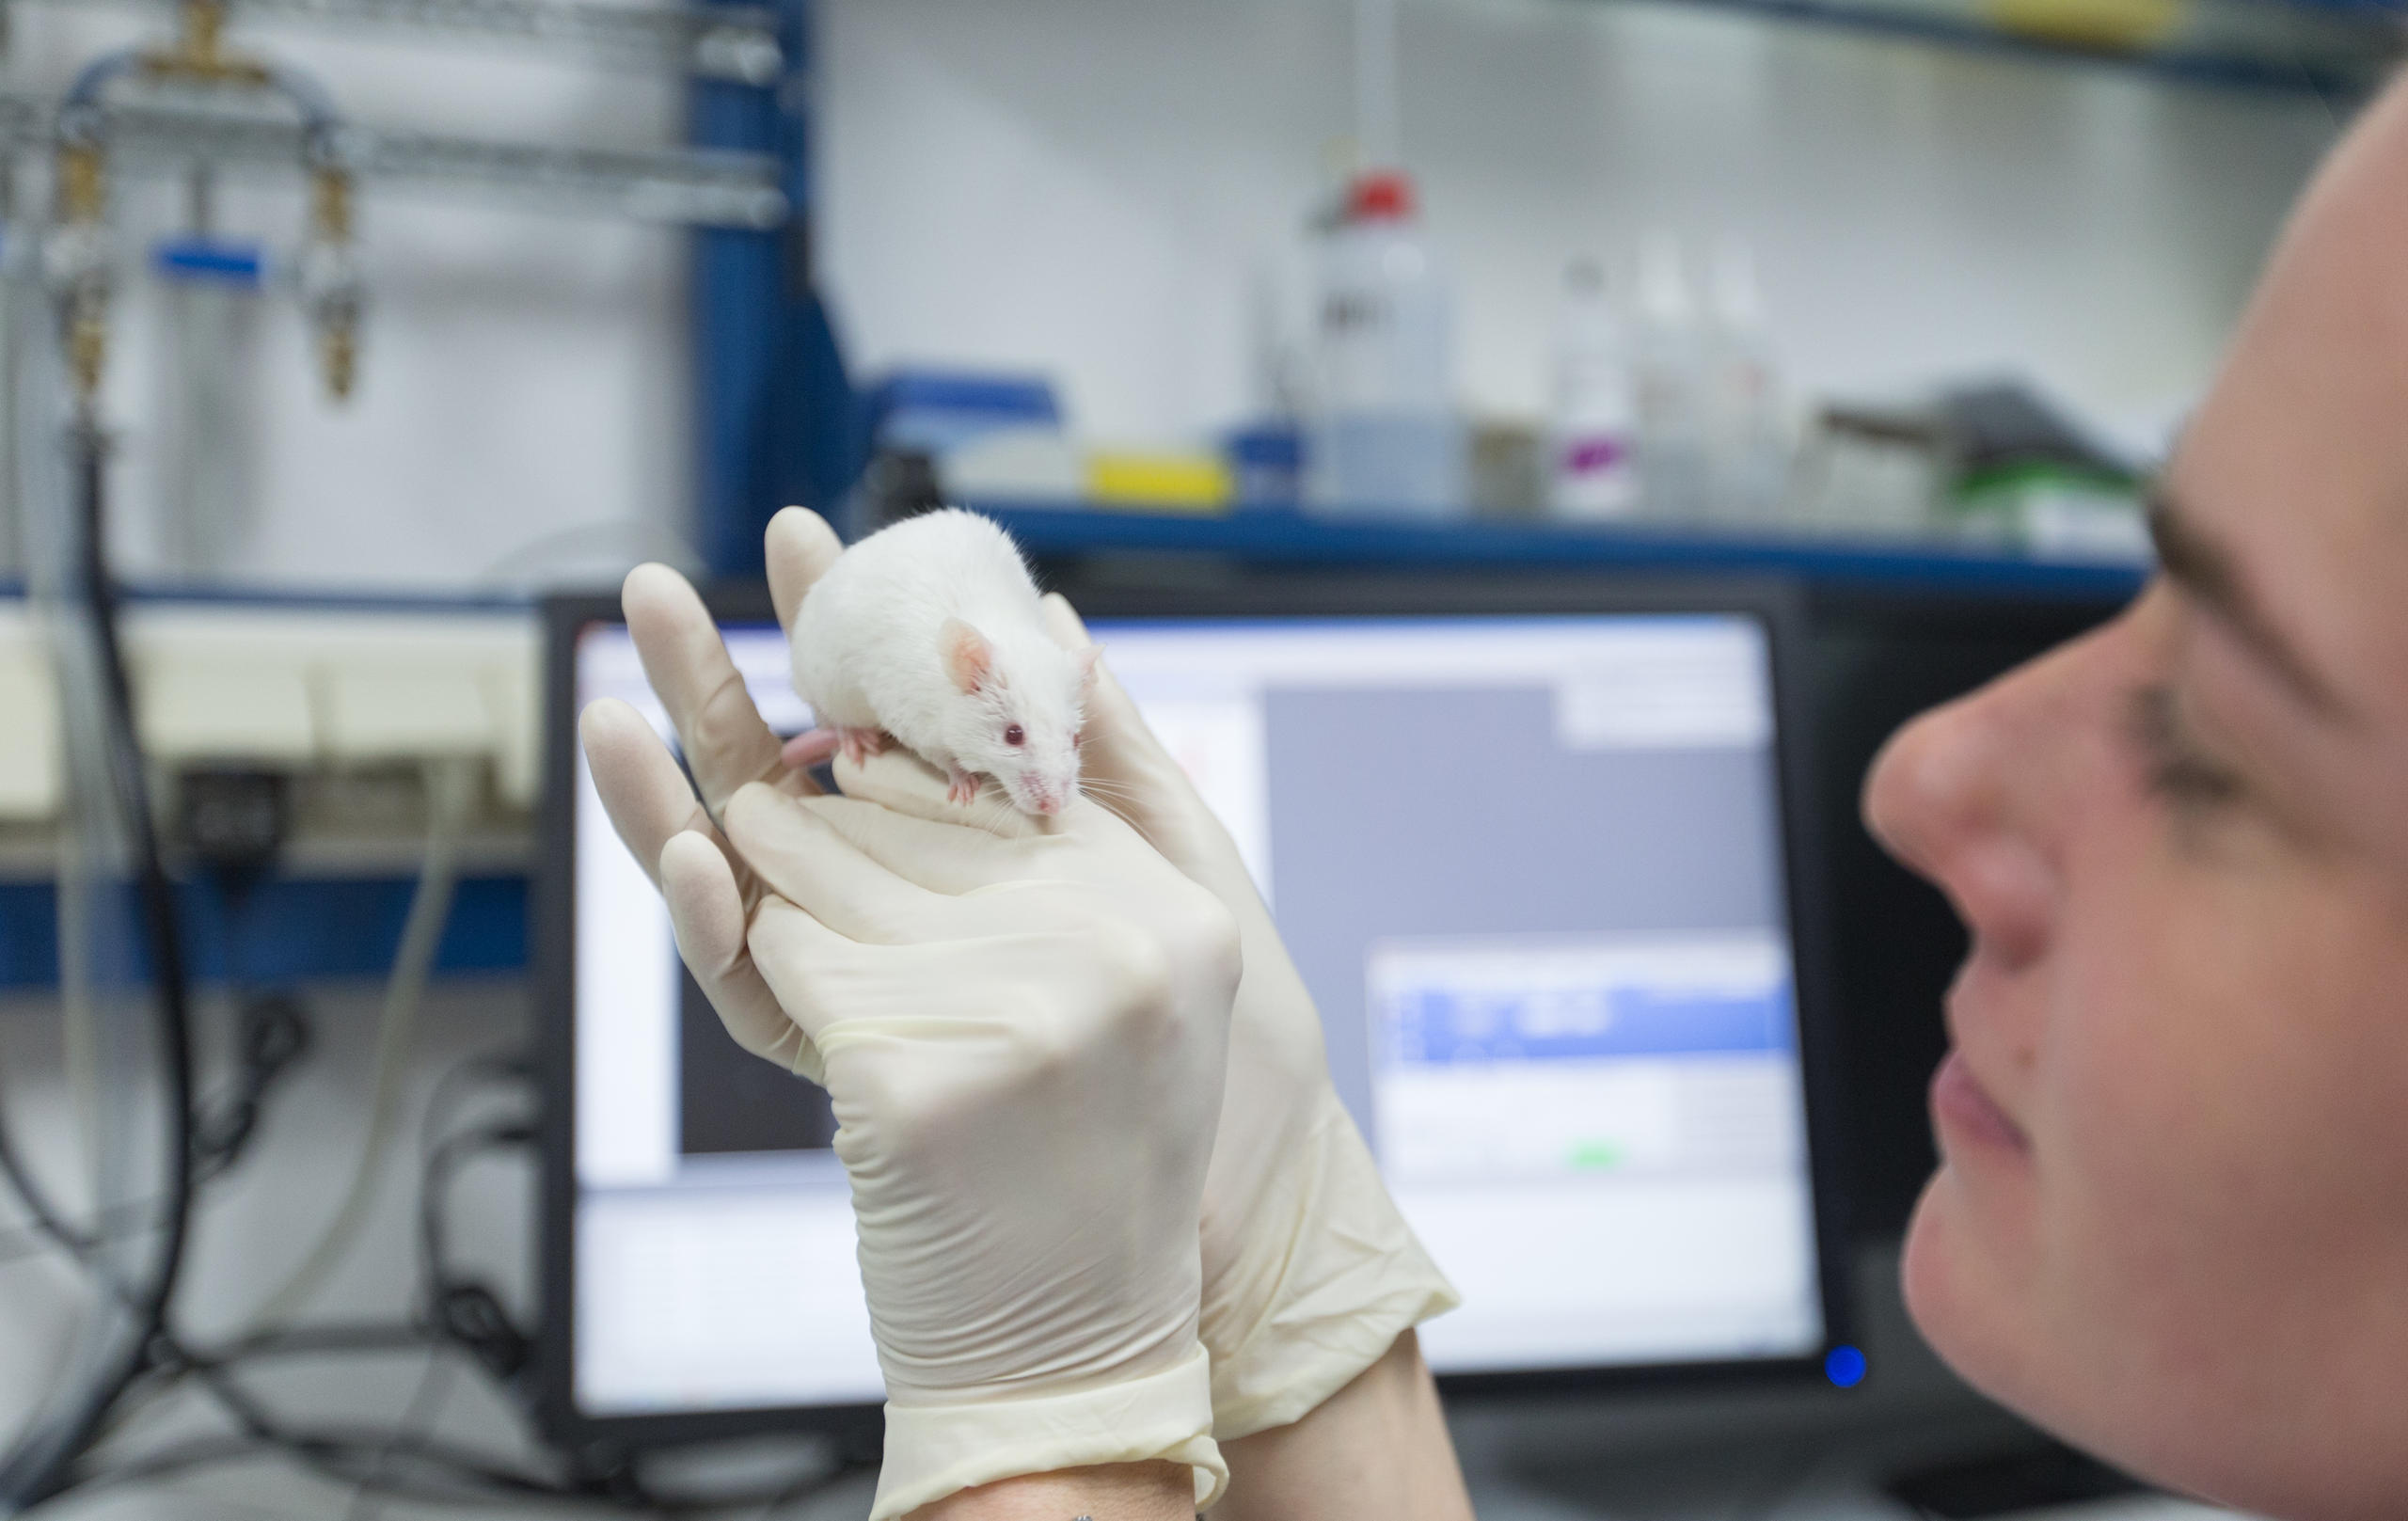 A research assistant holds a white mouse in her hand in a lab at the University of Muenster in Germany